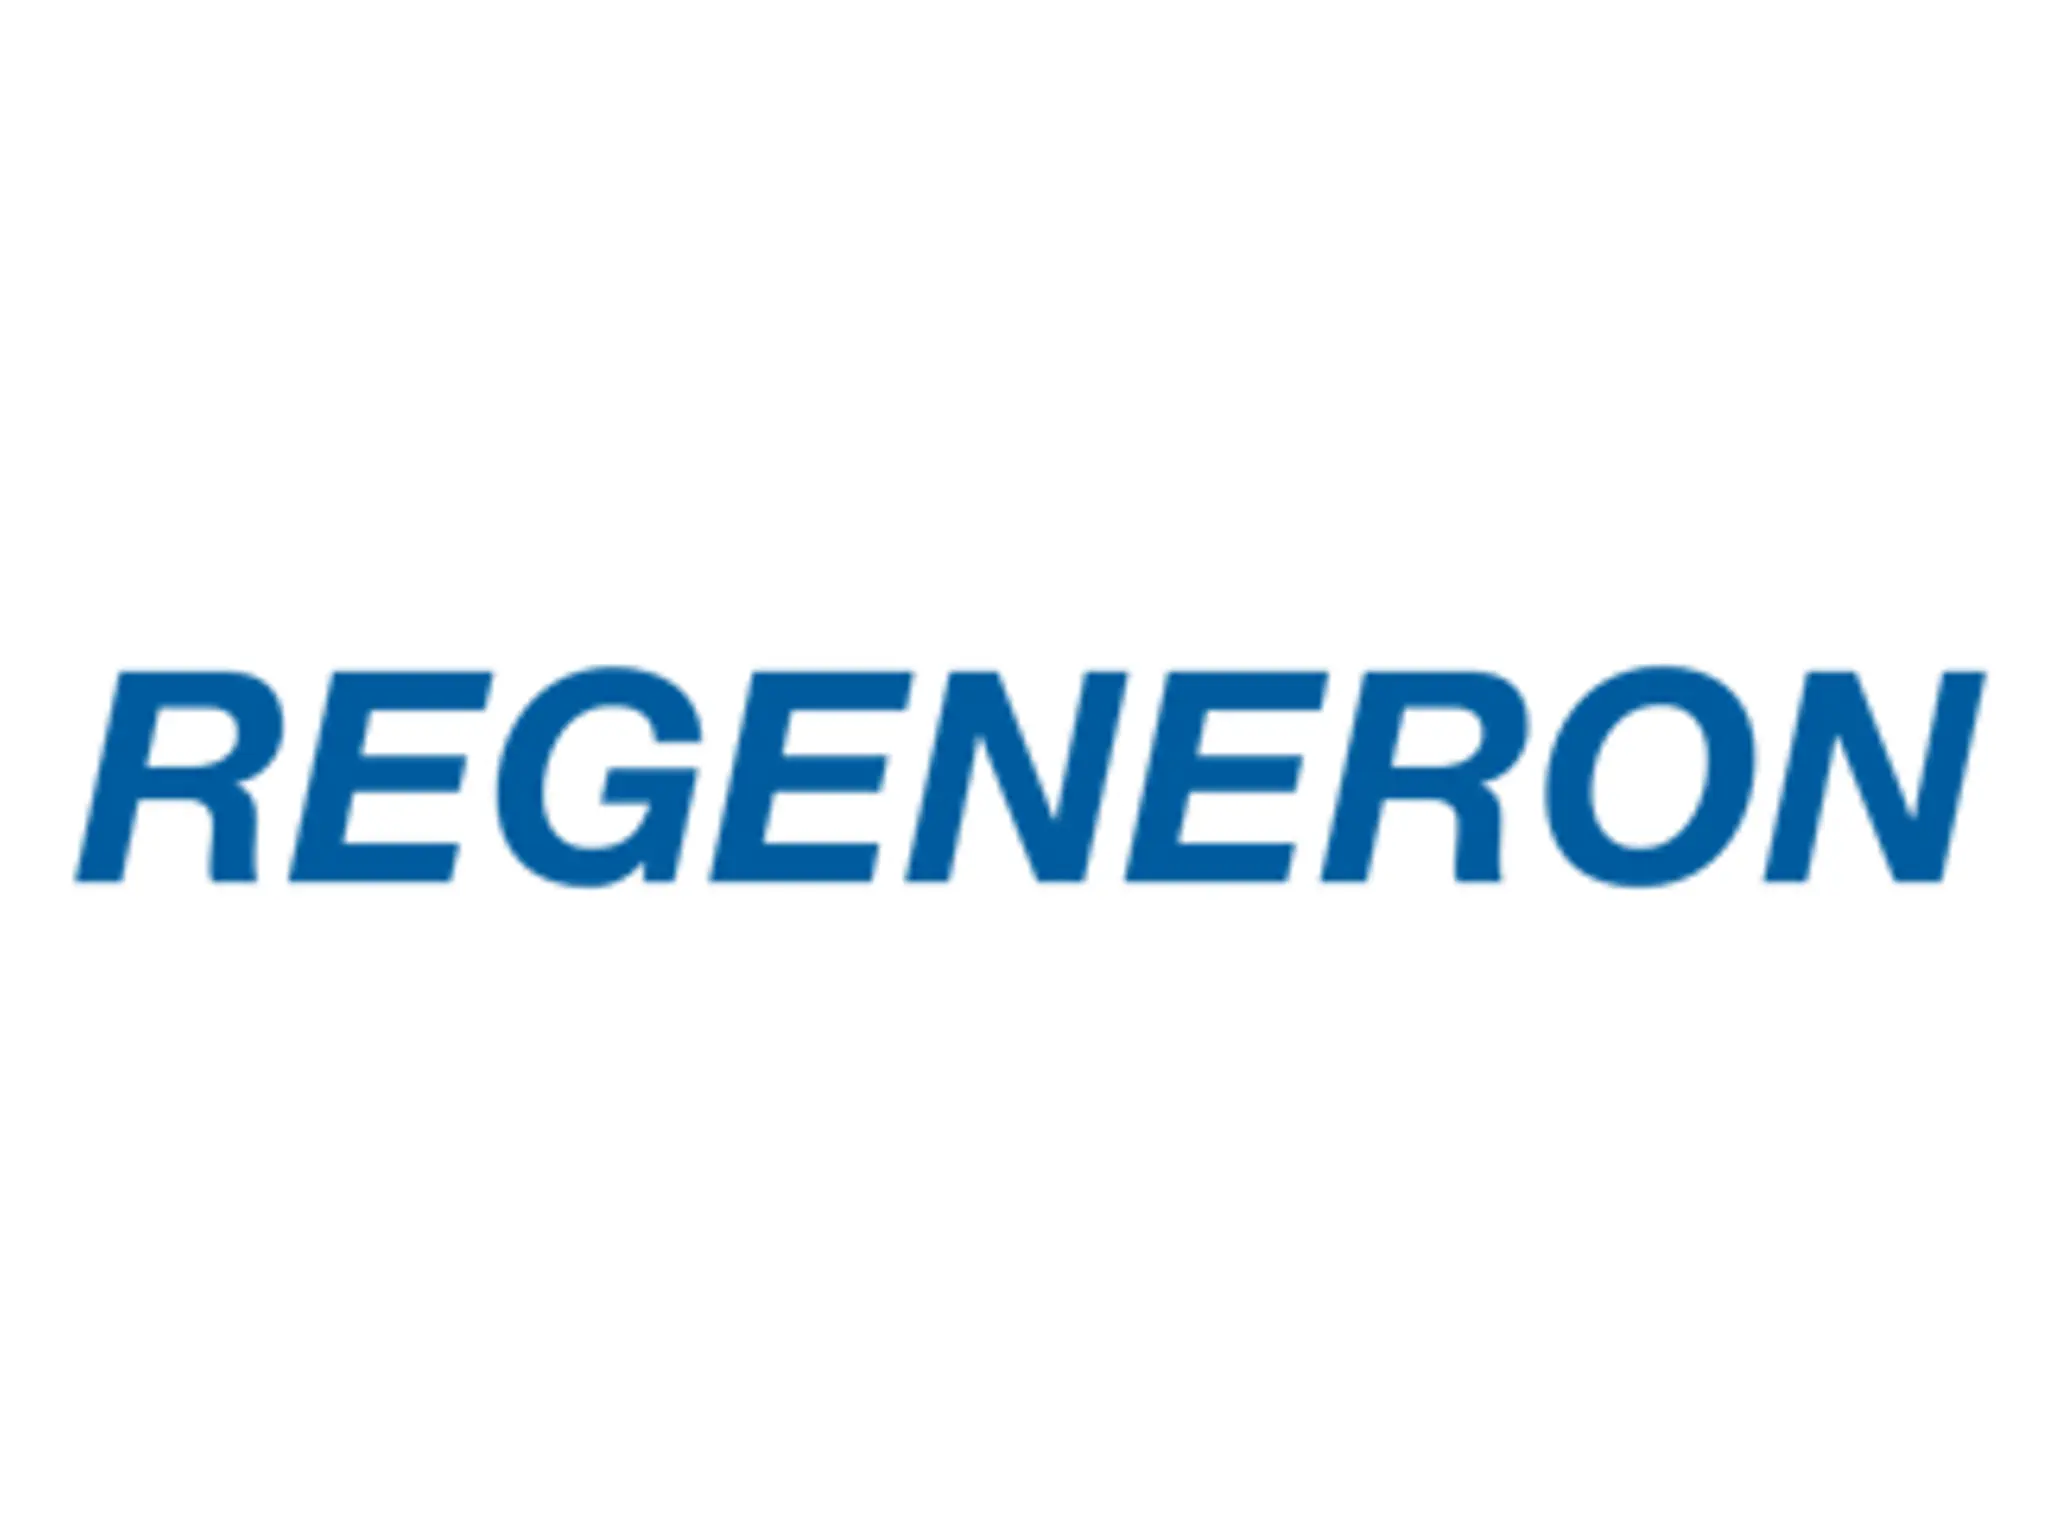 Regeneron to highlight advances in genetic medicine research at ASGCT